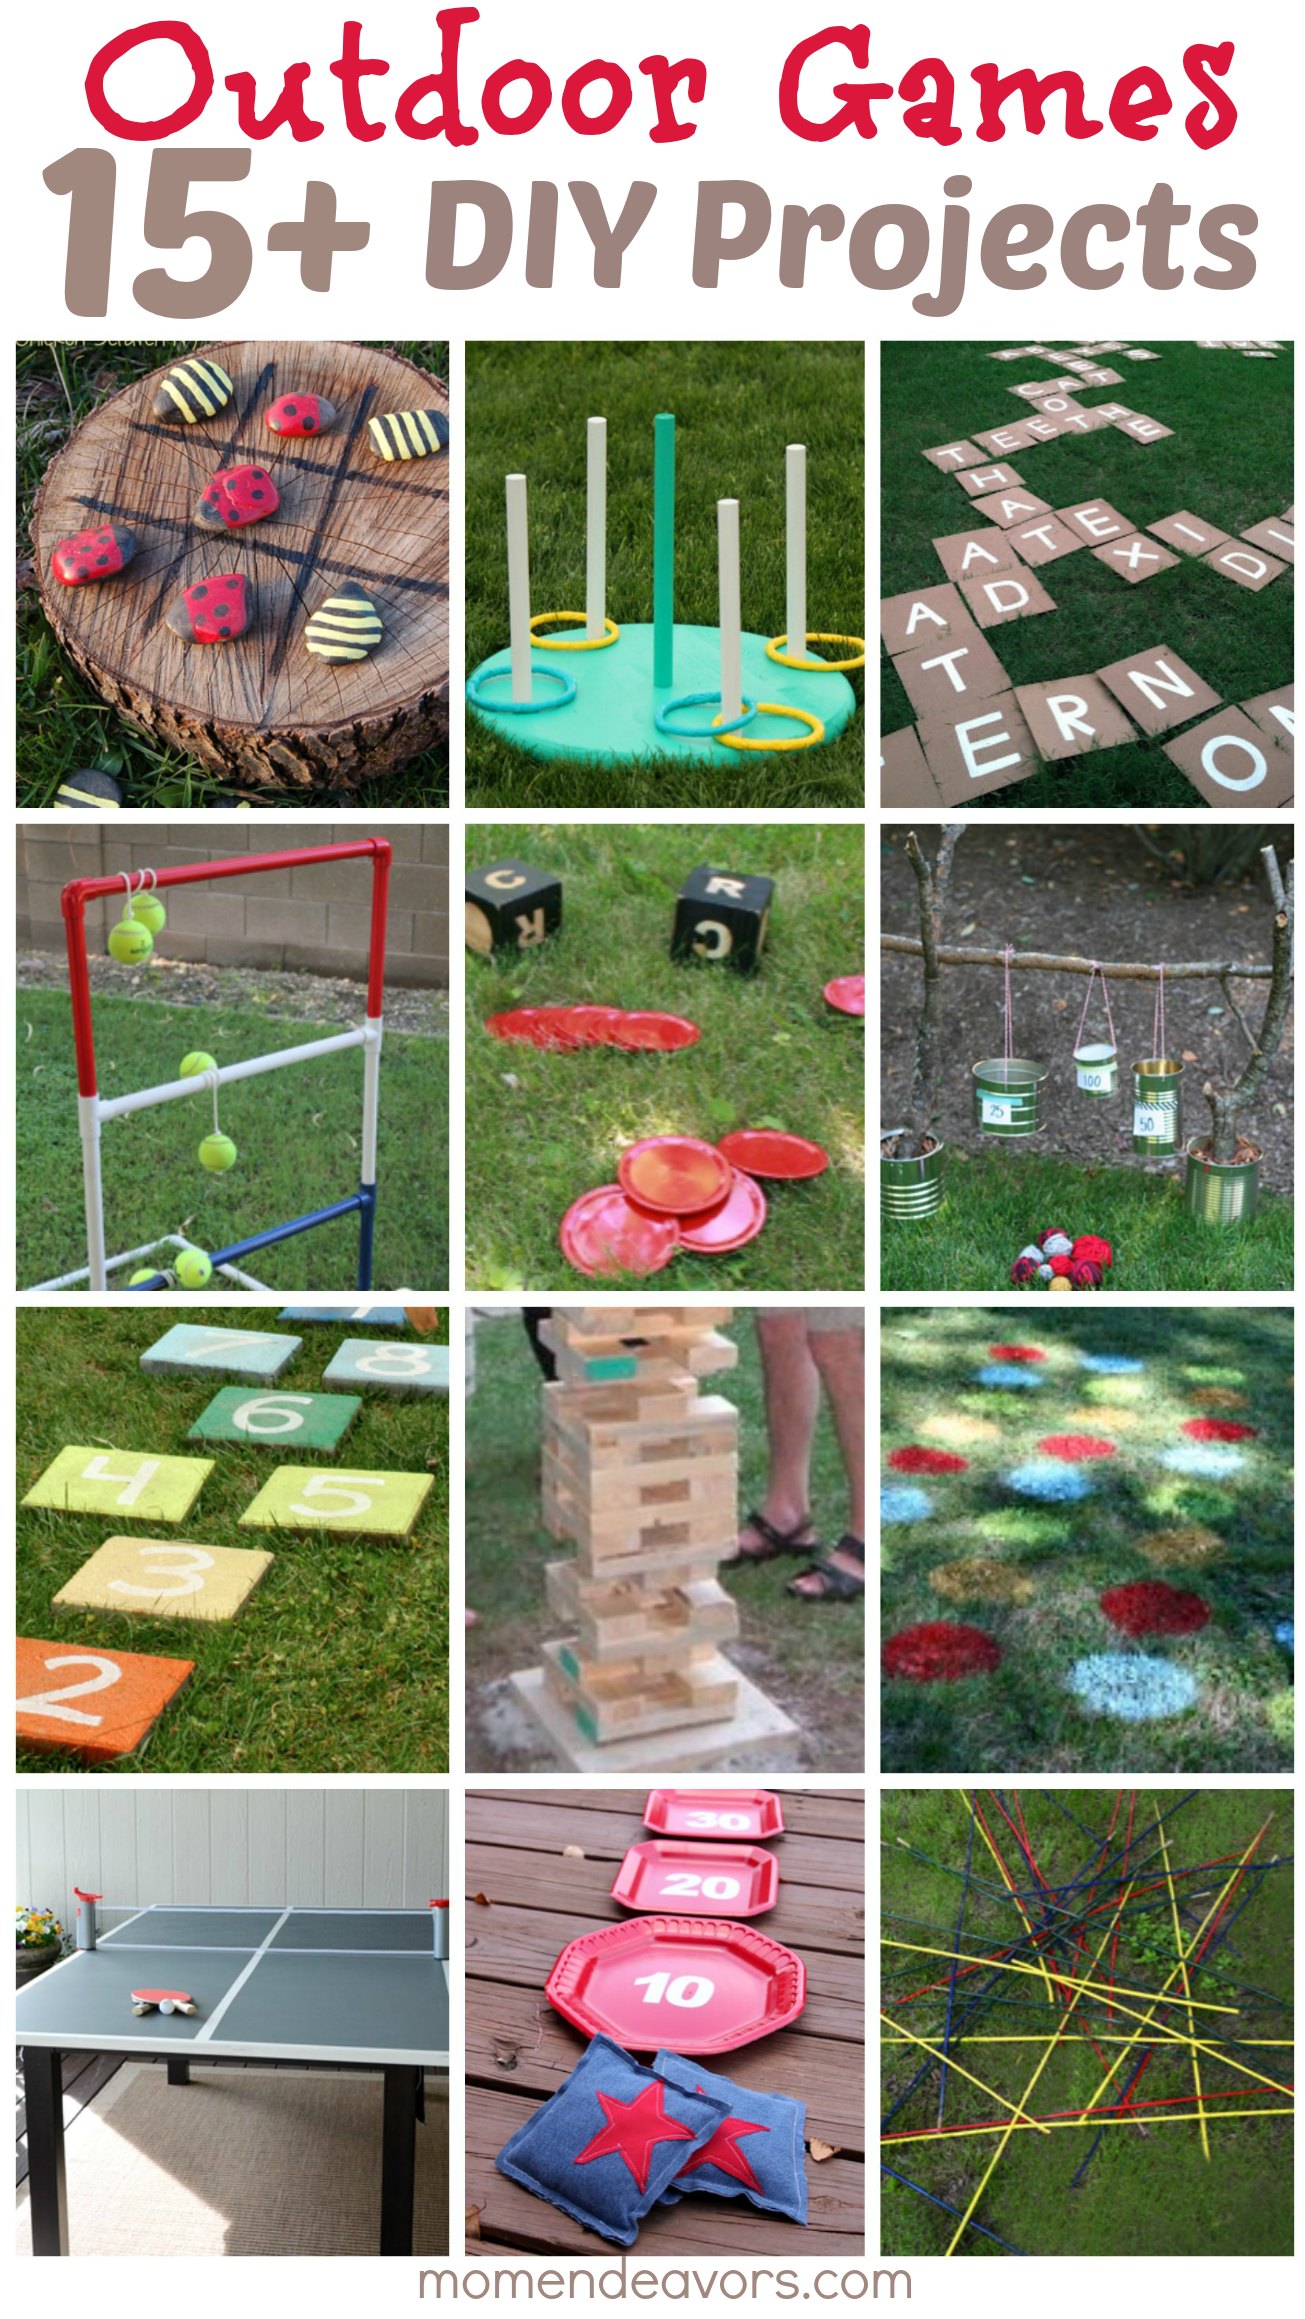 DIY Outdoor Games – 15+ Awesome Project Ideas for Backyard Fun!